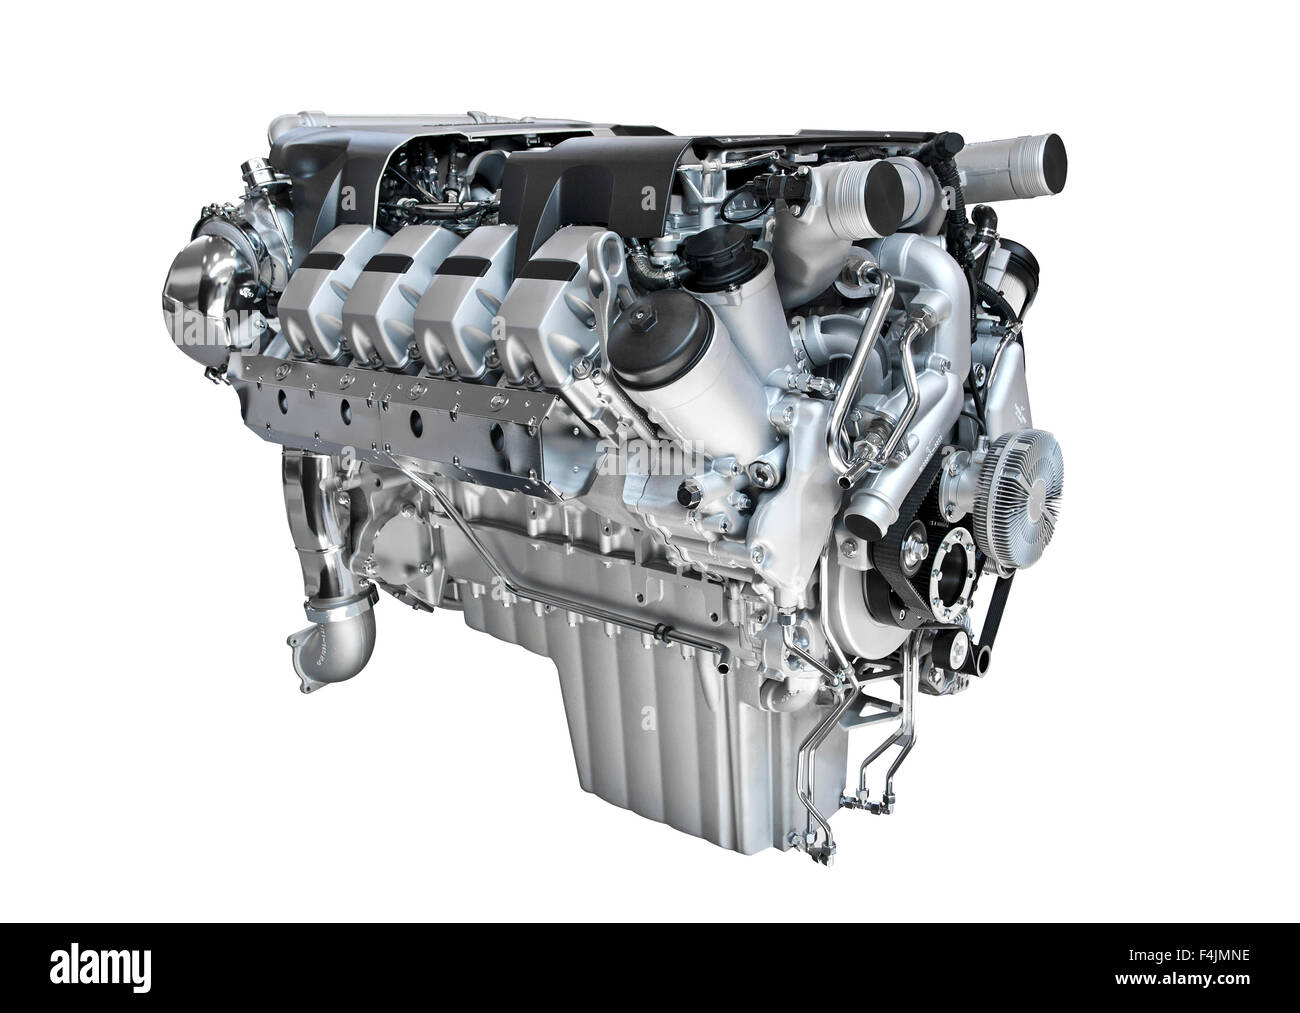 Cut out diesel engine of a truck. Stock Photo